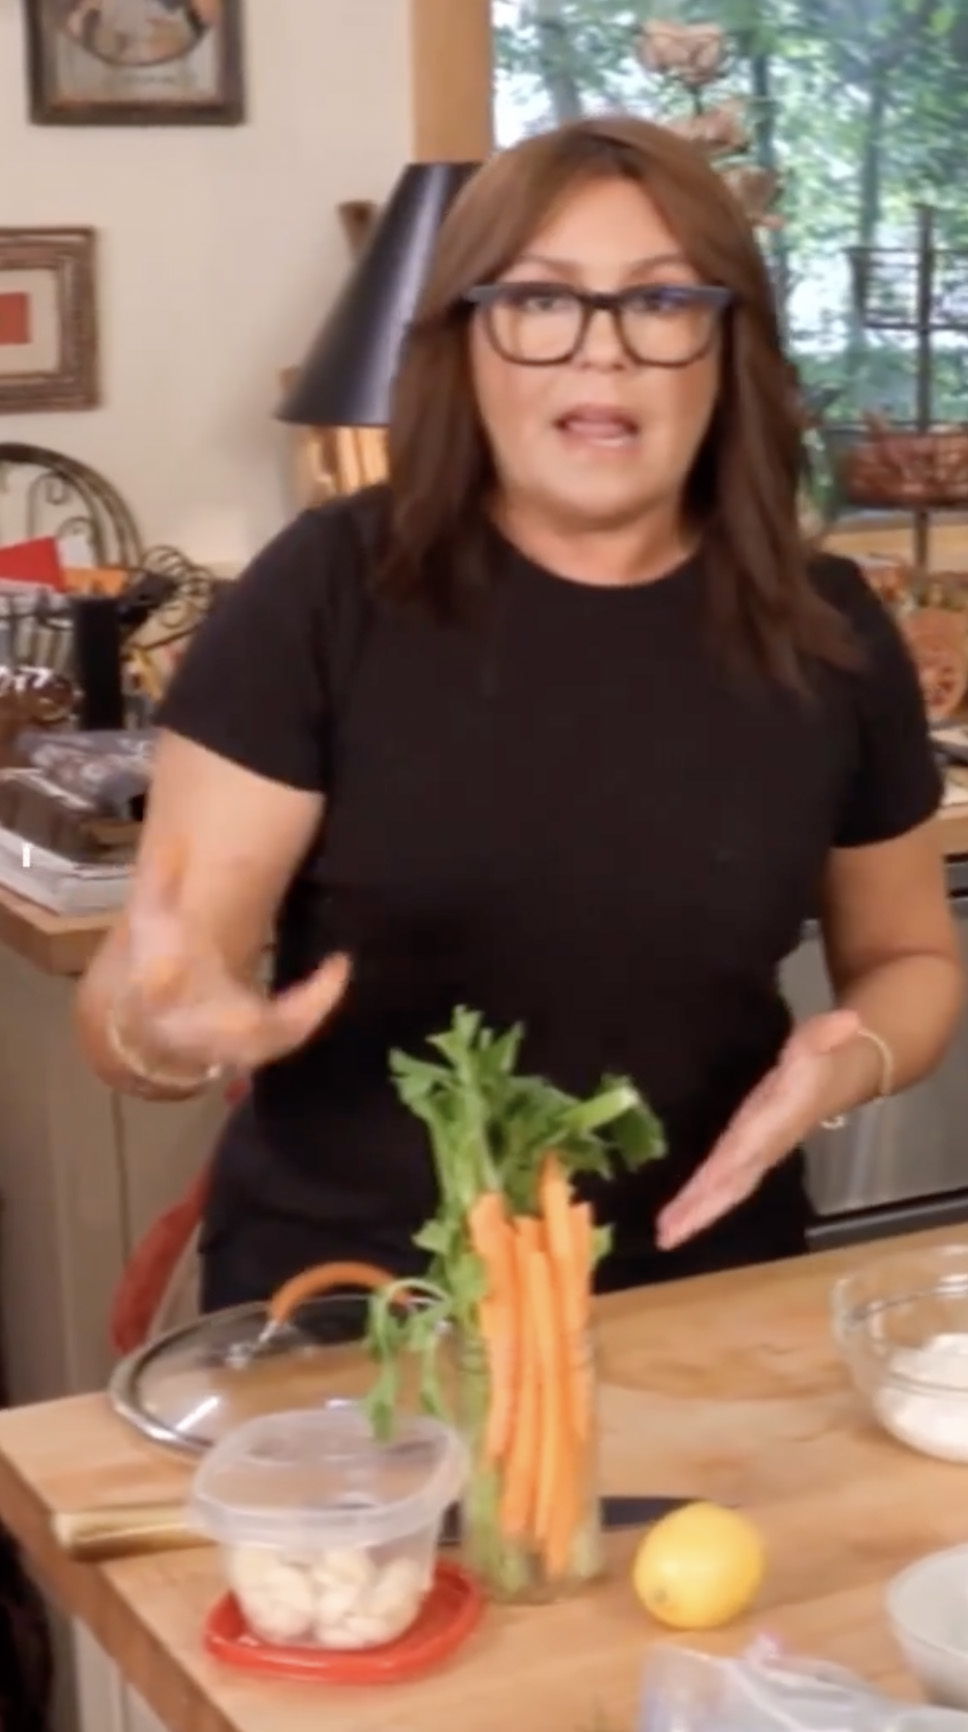 Rachael promoted her new show, Meals in Minutes